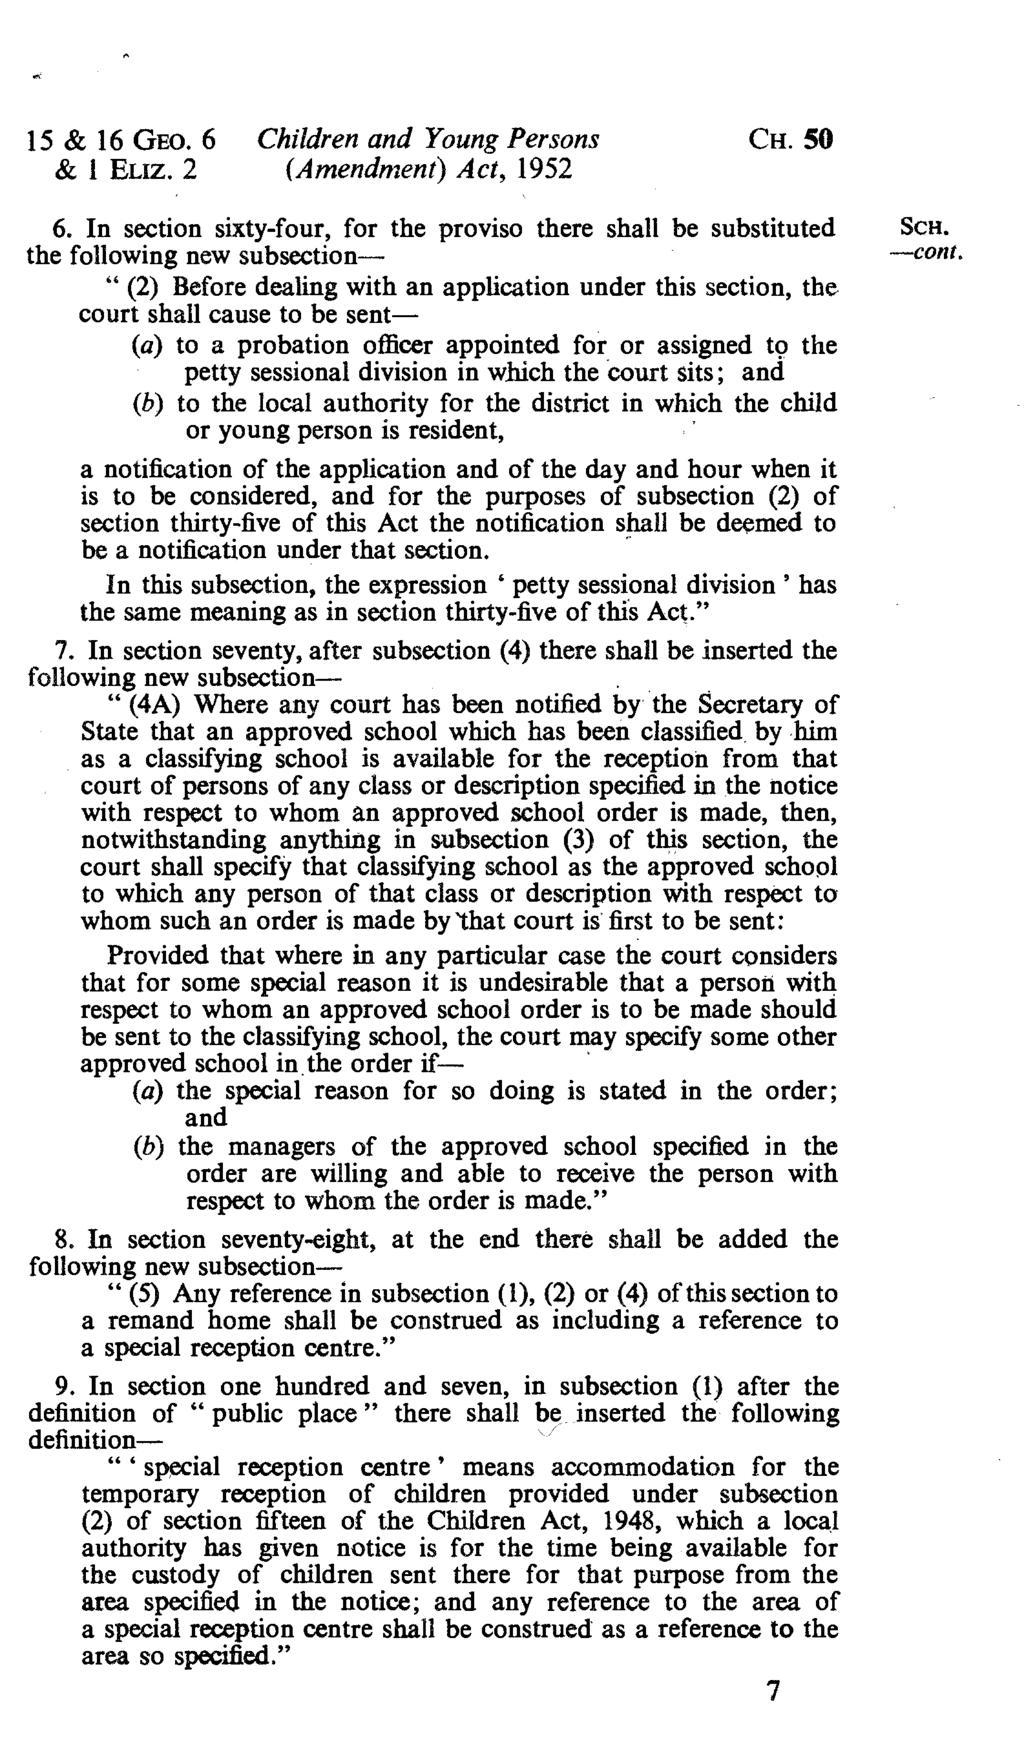 15 & 16 GEO. 6 Children and Young Persons CH. 50 & I Errz. 2 (Amendment) Act, 1952 6.